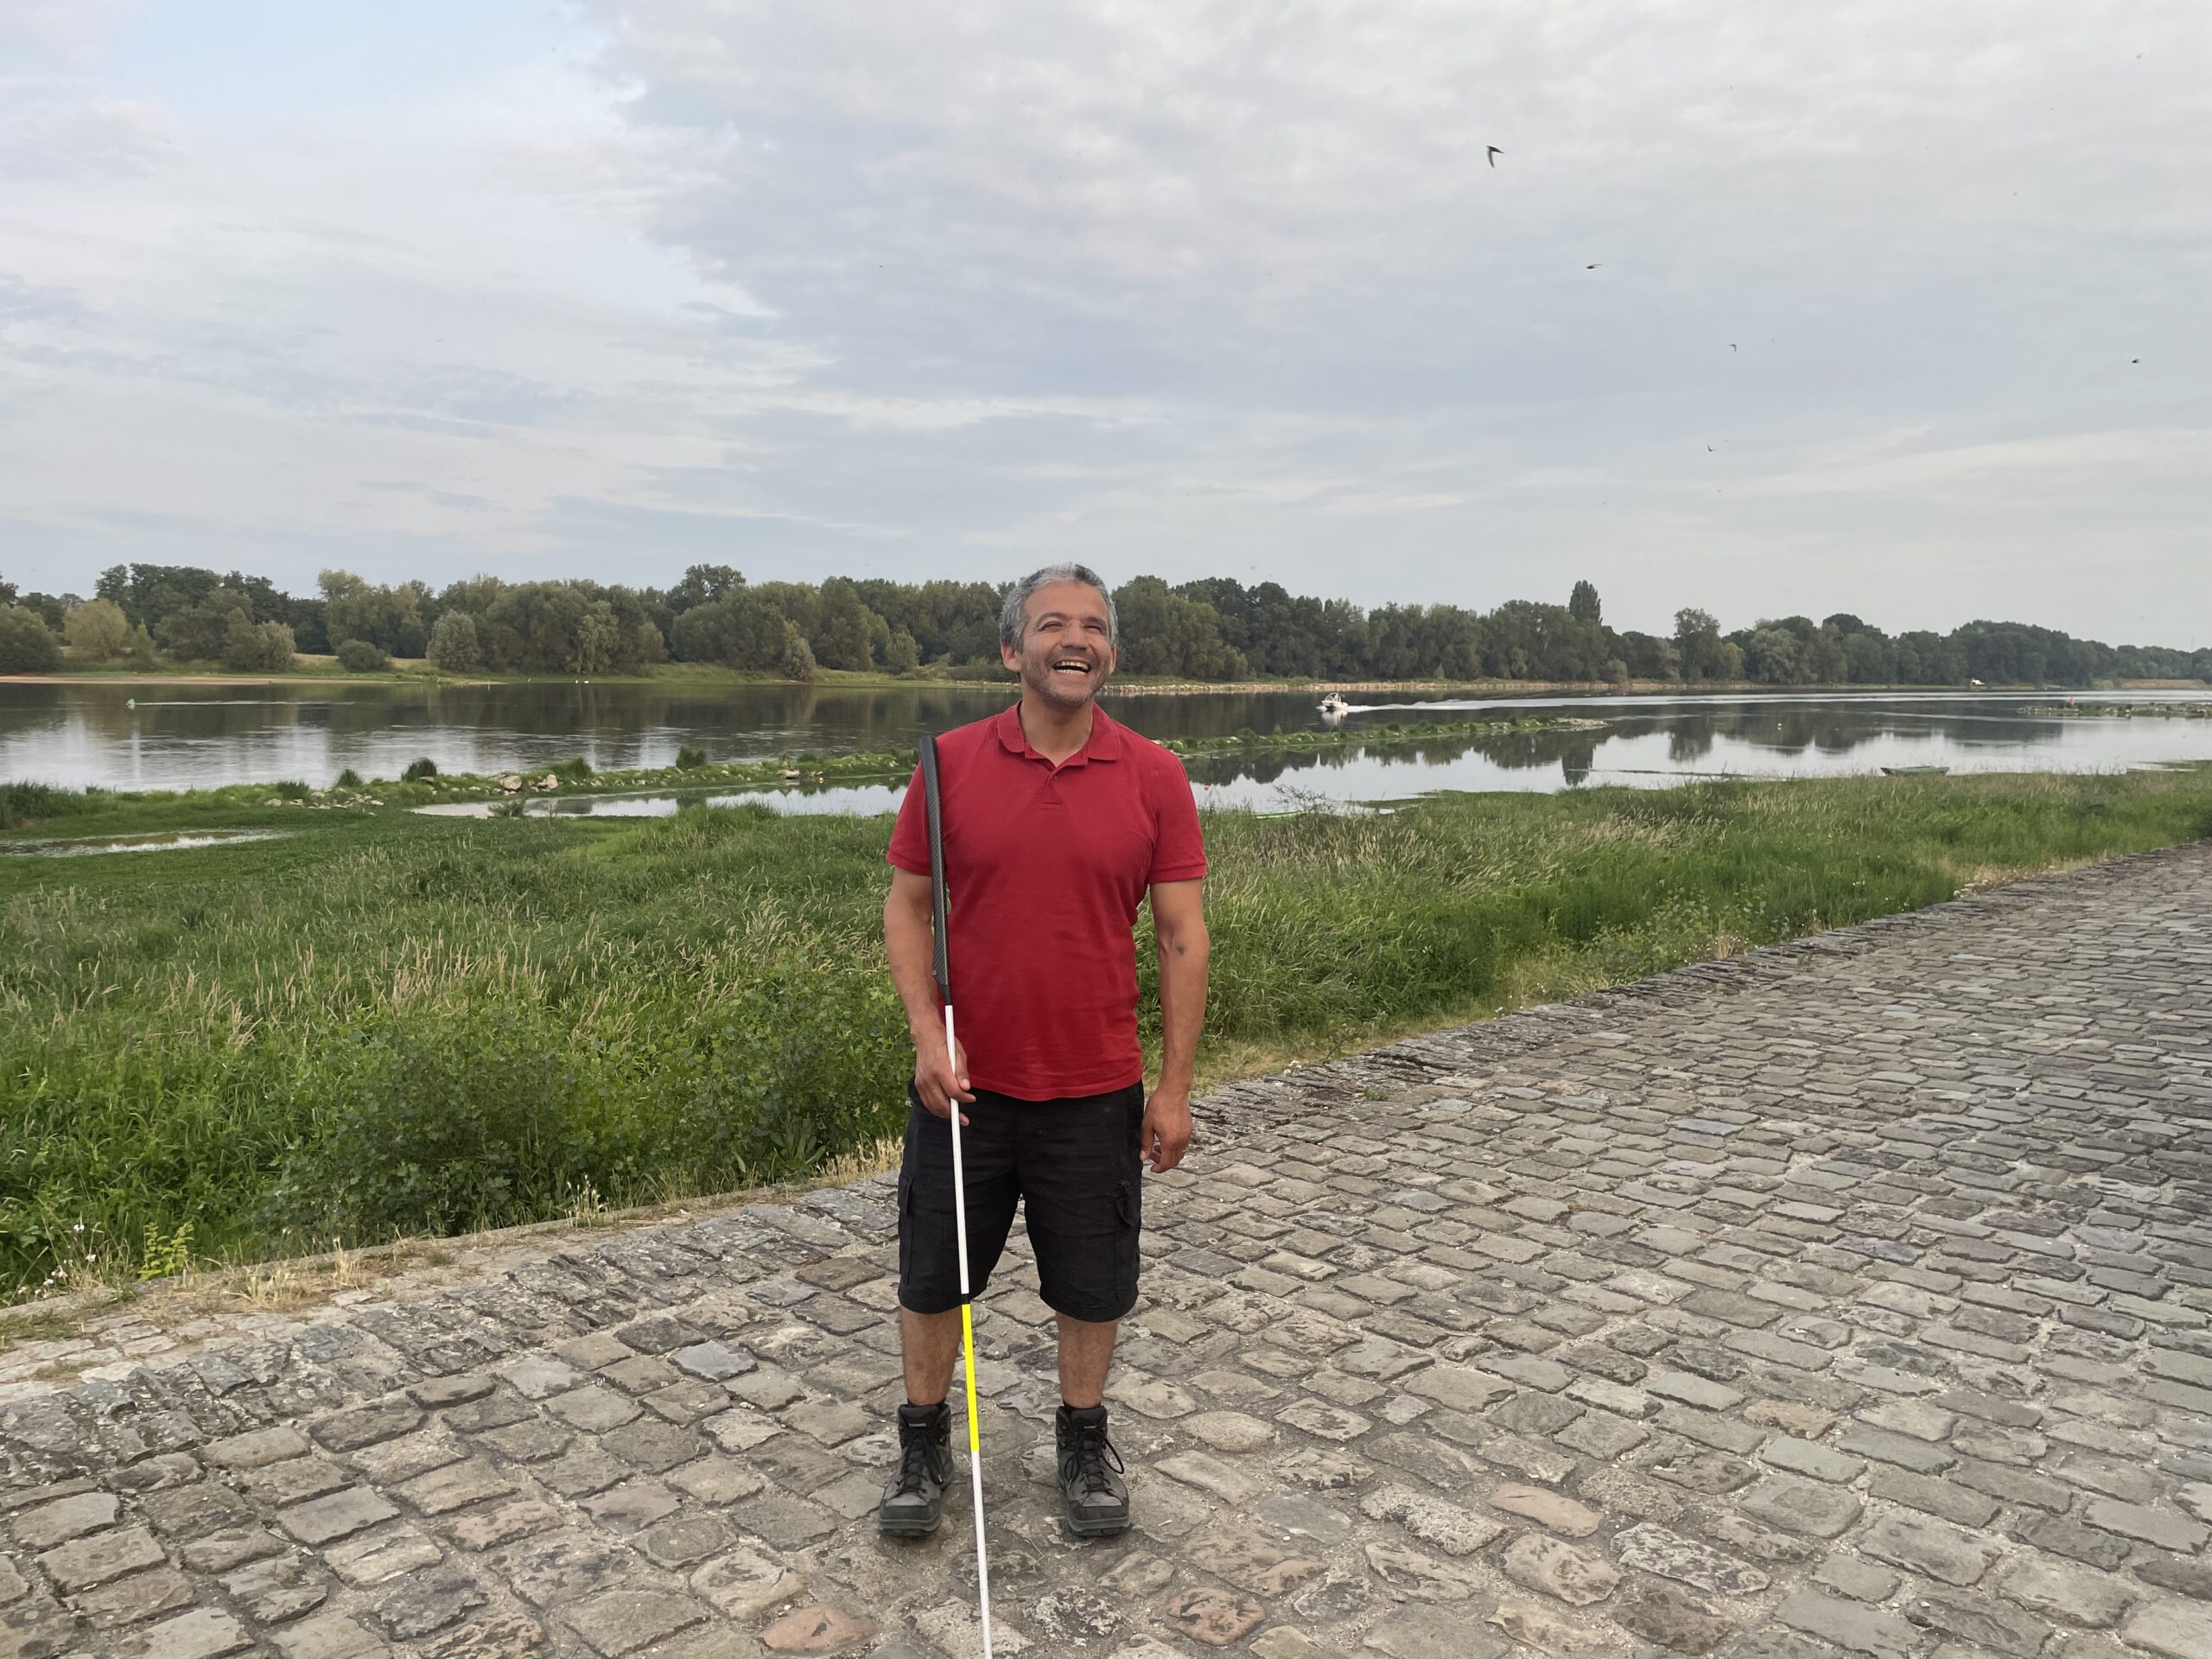 Juan standing on a pavement in France with water in the Background